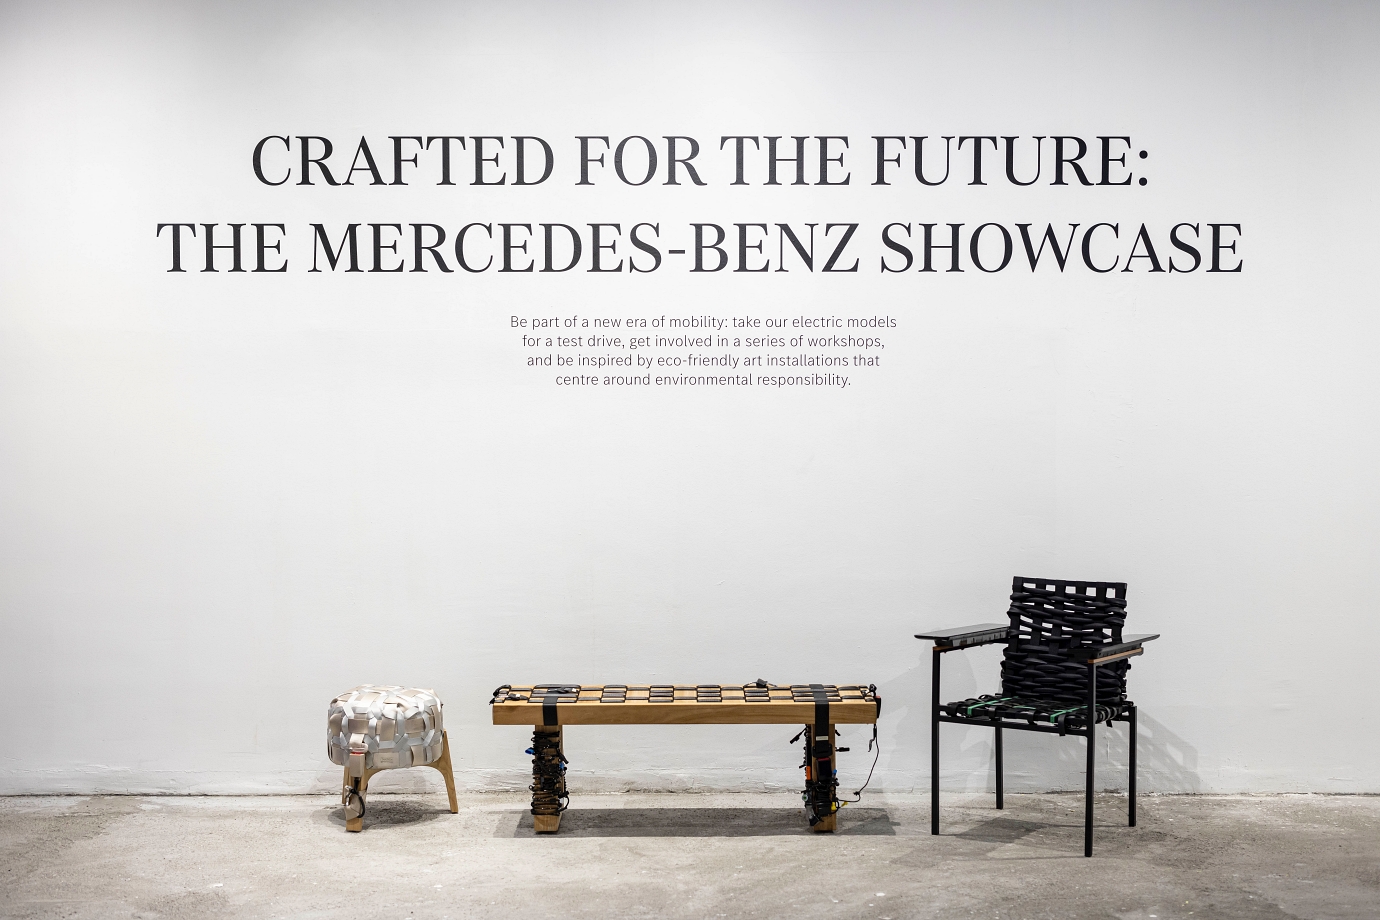 mercedes singapore, cycle & carriage, mercedes-benz, raffles city, crafted for the future, ev, electric vehicles, eq, mercedes-eq, mercedes, mercedes-benz, amg, mercedes-amg, star-craft : the mercedes-benz 'crafted for the future' showcase at raffles city